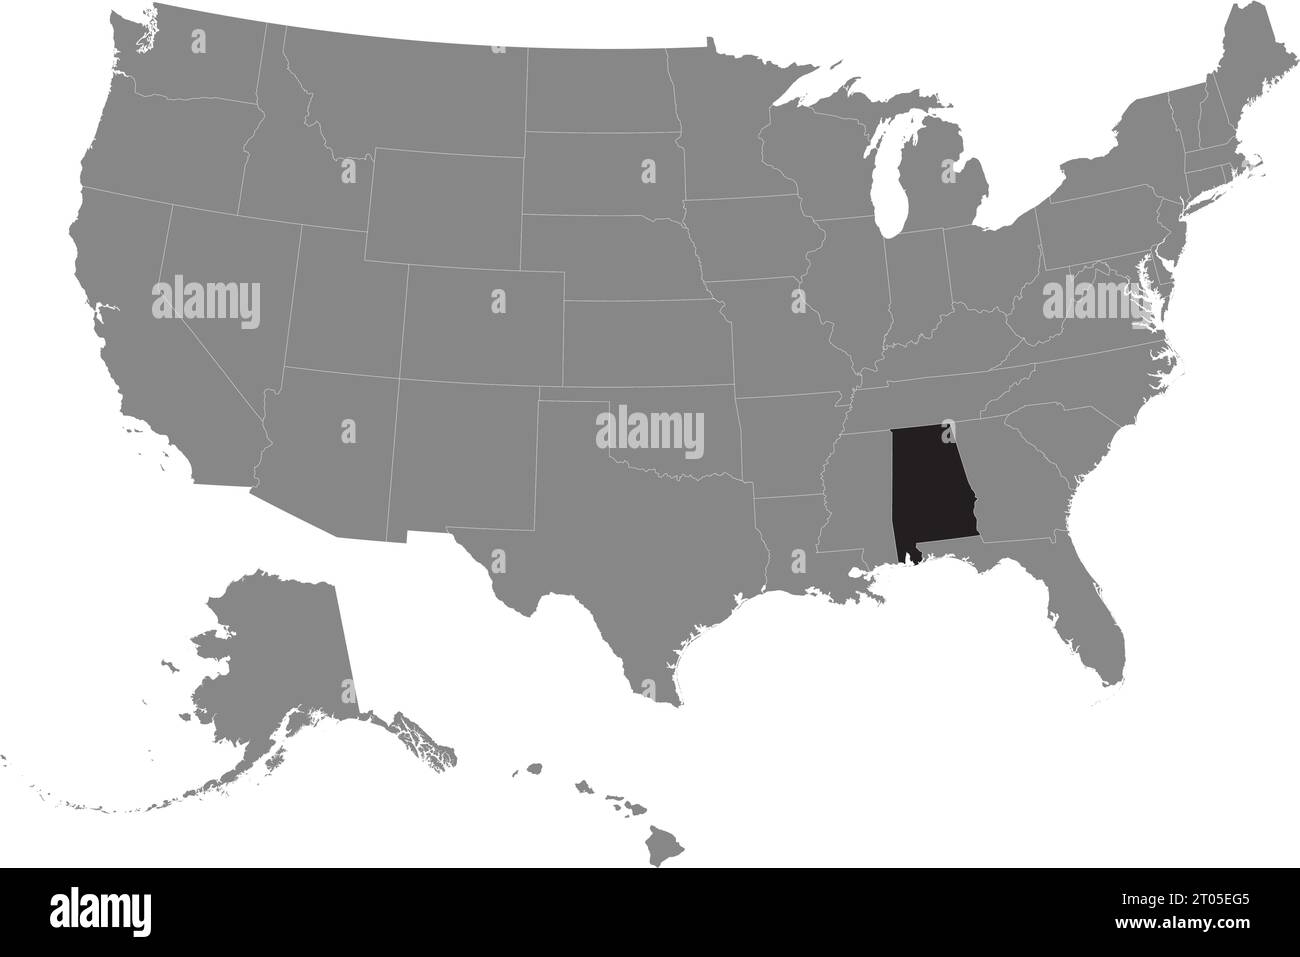 Black CMYK federal map of ALABAMA inside detailed gray blank political map of the United States of America on transparent background Stock Vector